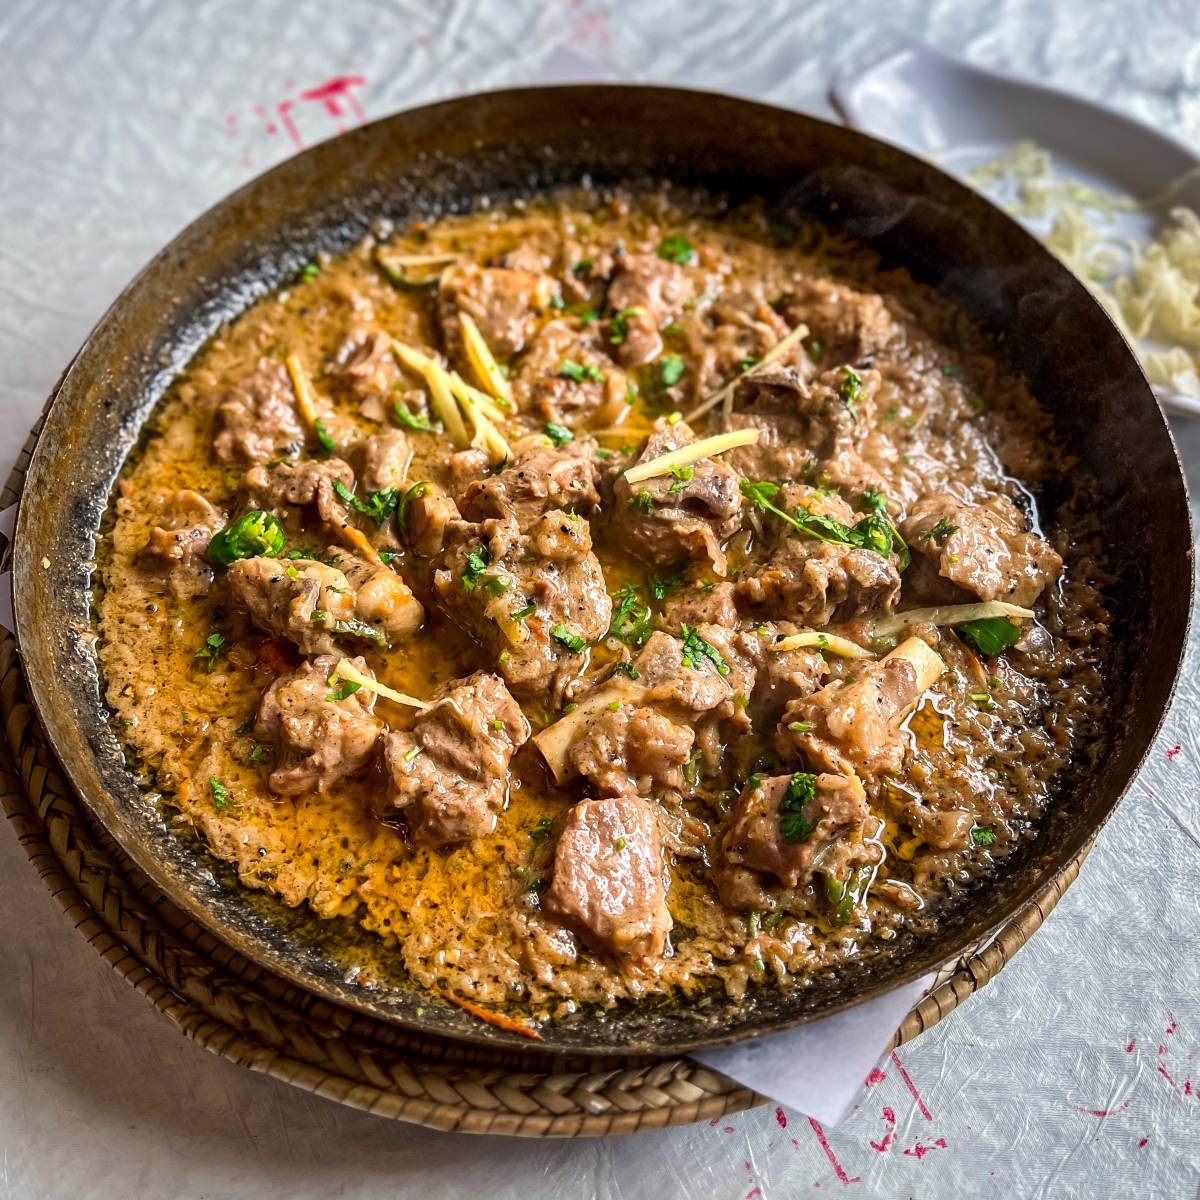 Is this the best ‘Mutton Karahi’ in the Eastern Province? – ‘Spice Bazaar’ in Khobar Shamaliyah